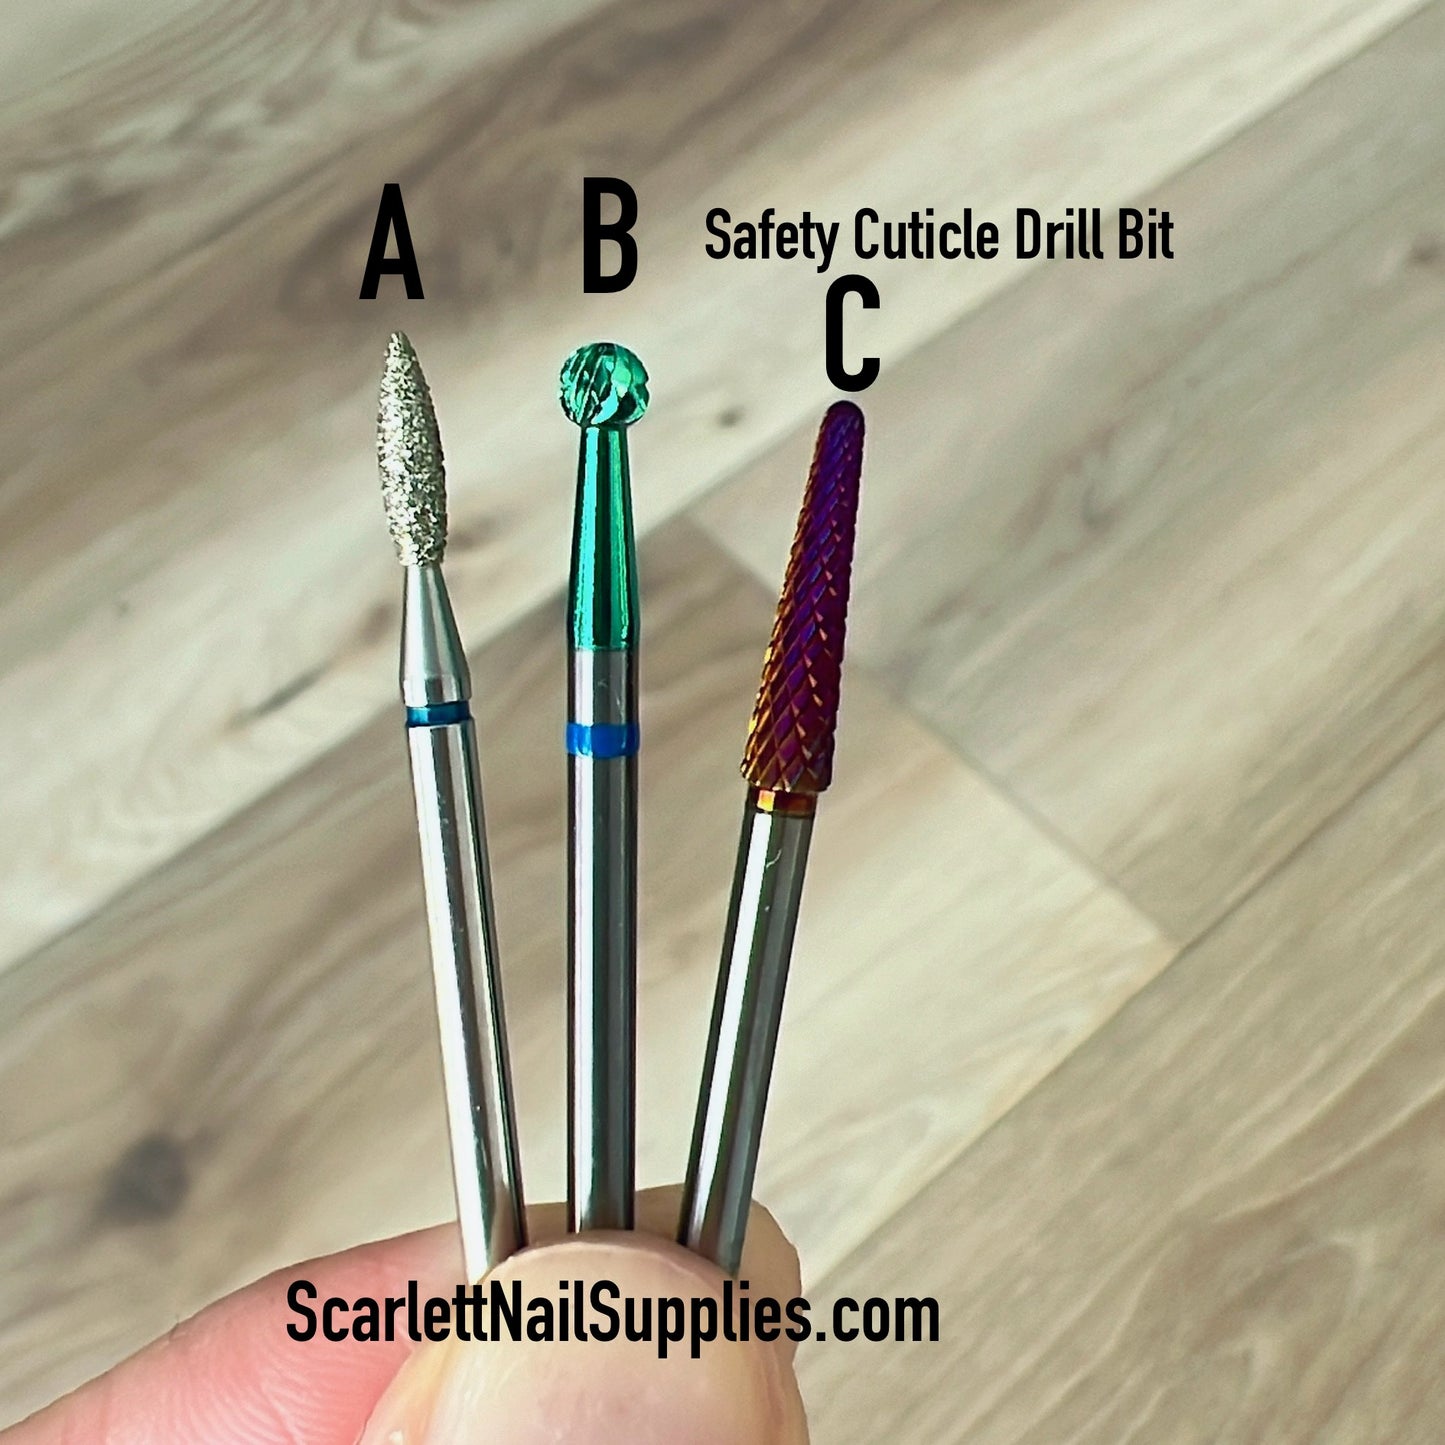 Safety Cuticle Drill Bit